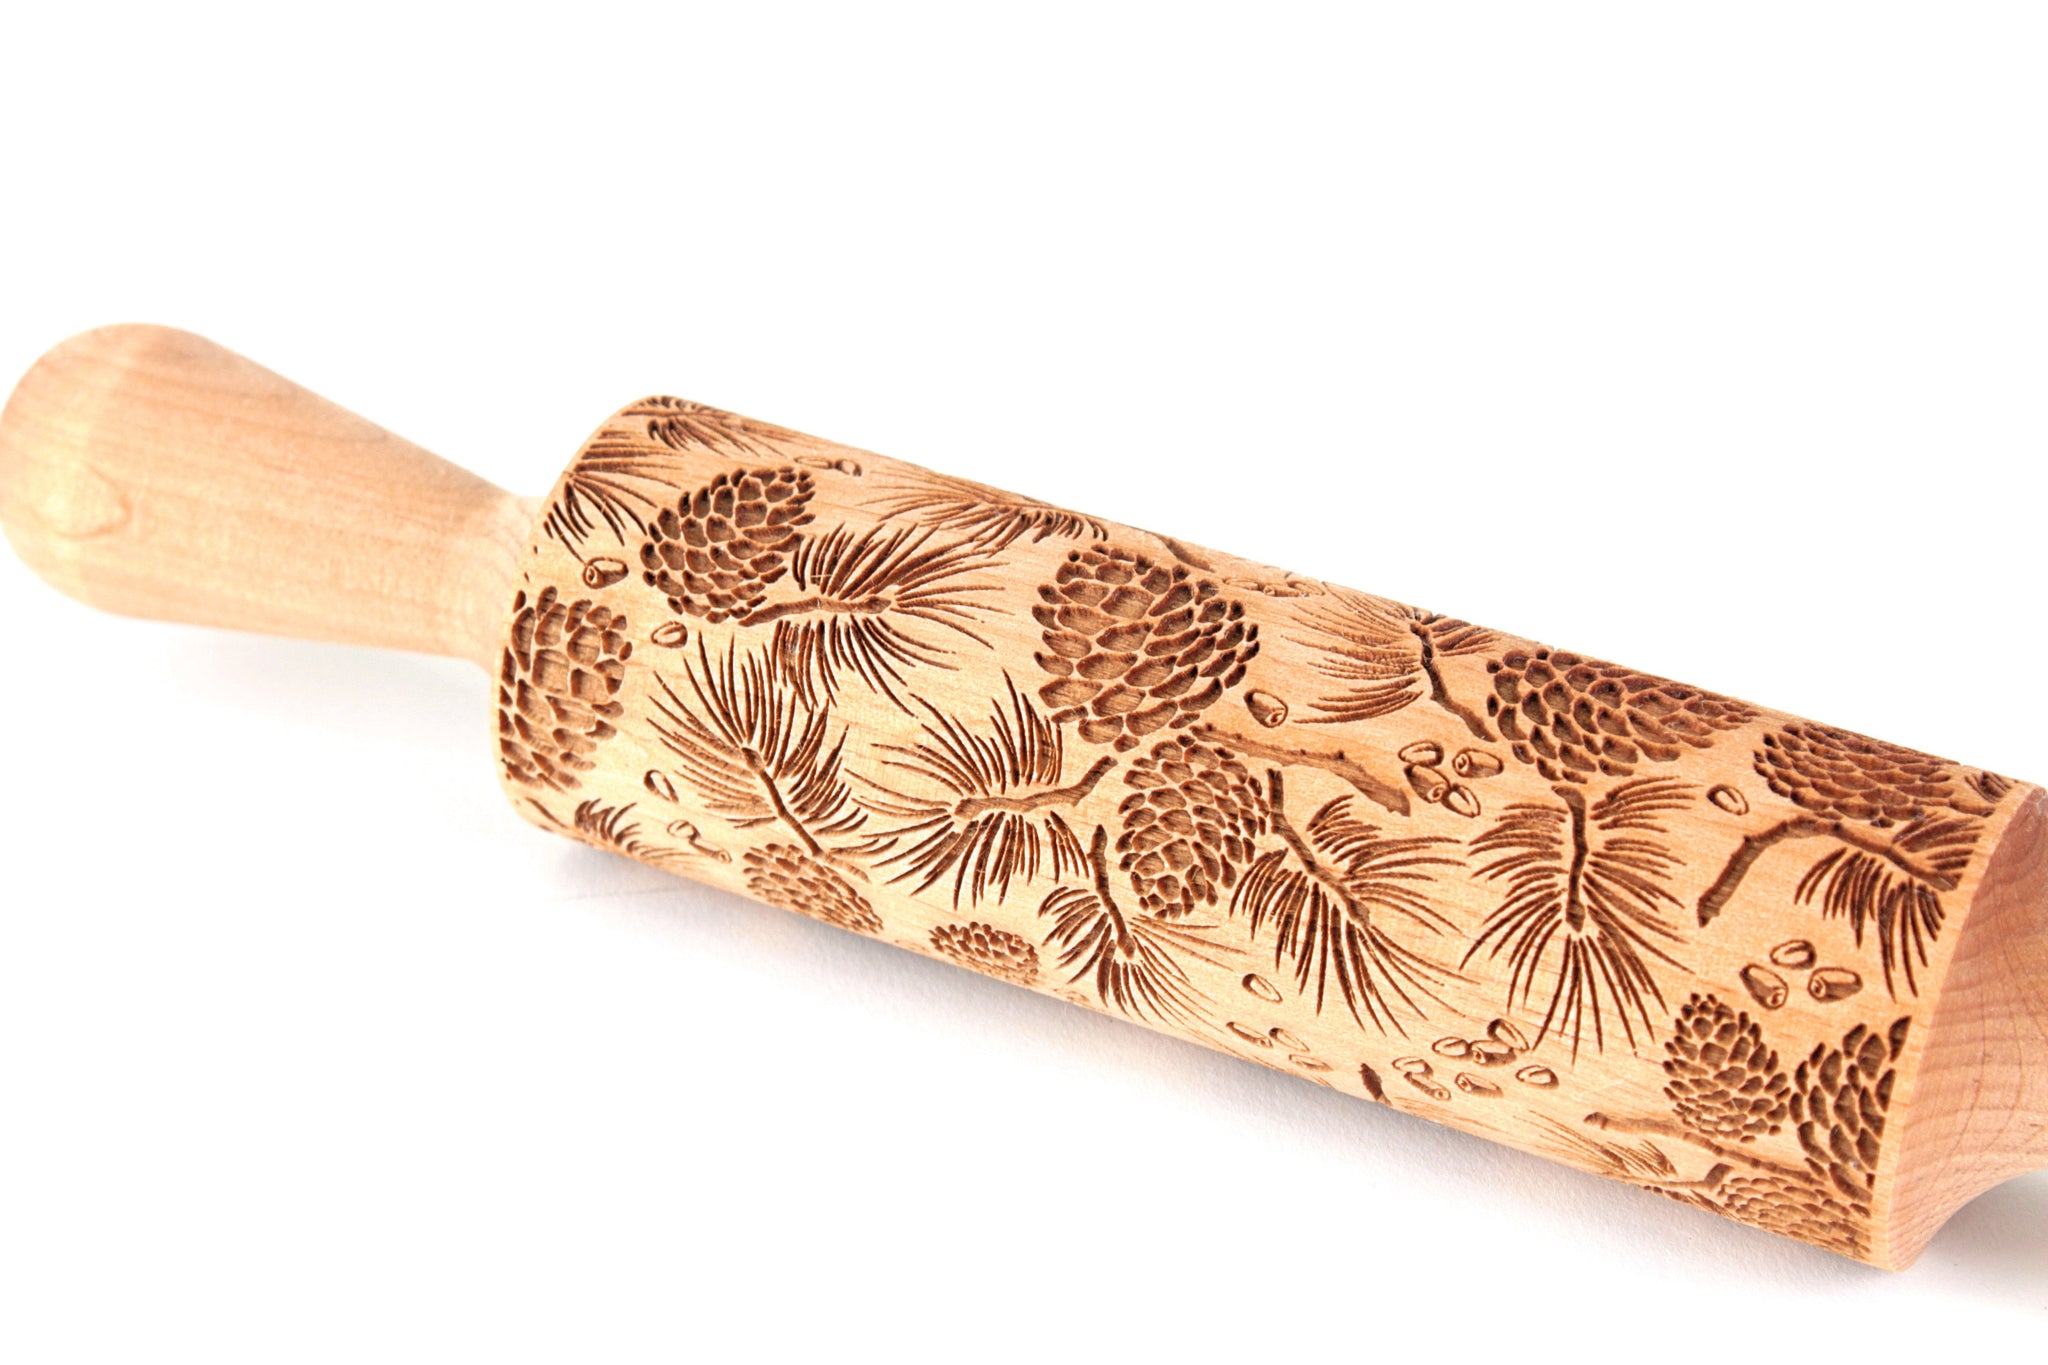 Embossed Rolling Pin, Handmade, Solid Wood, Add Magic to Baking